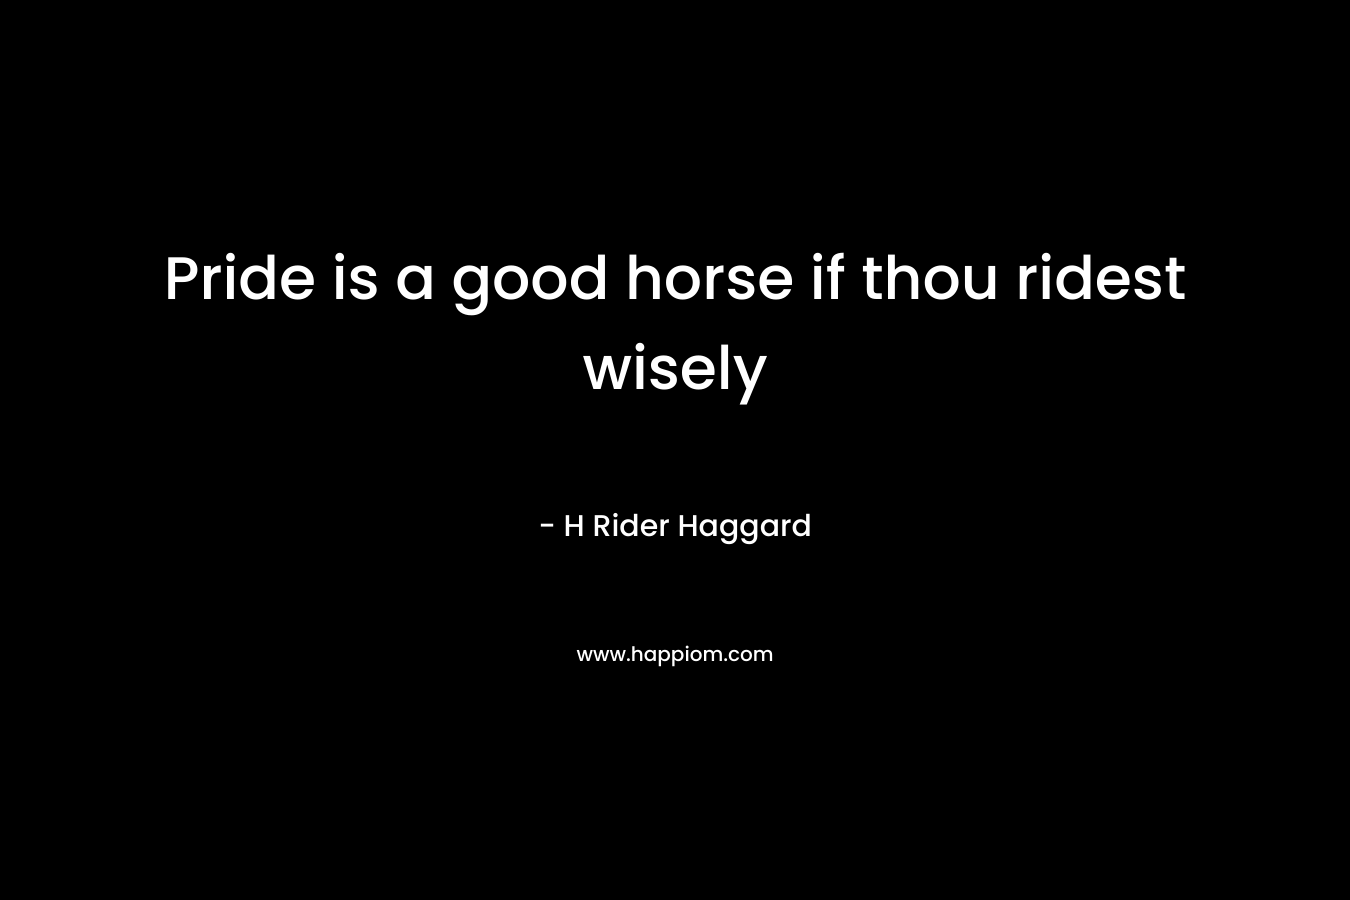 Pride is a good horse if thou ridest wisely – H Rider Haggard